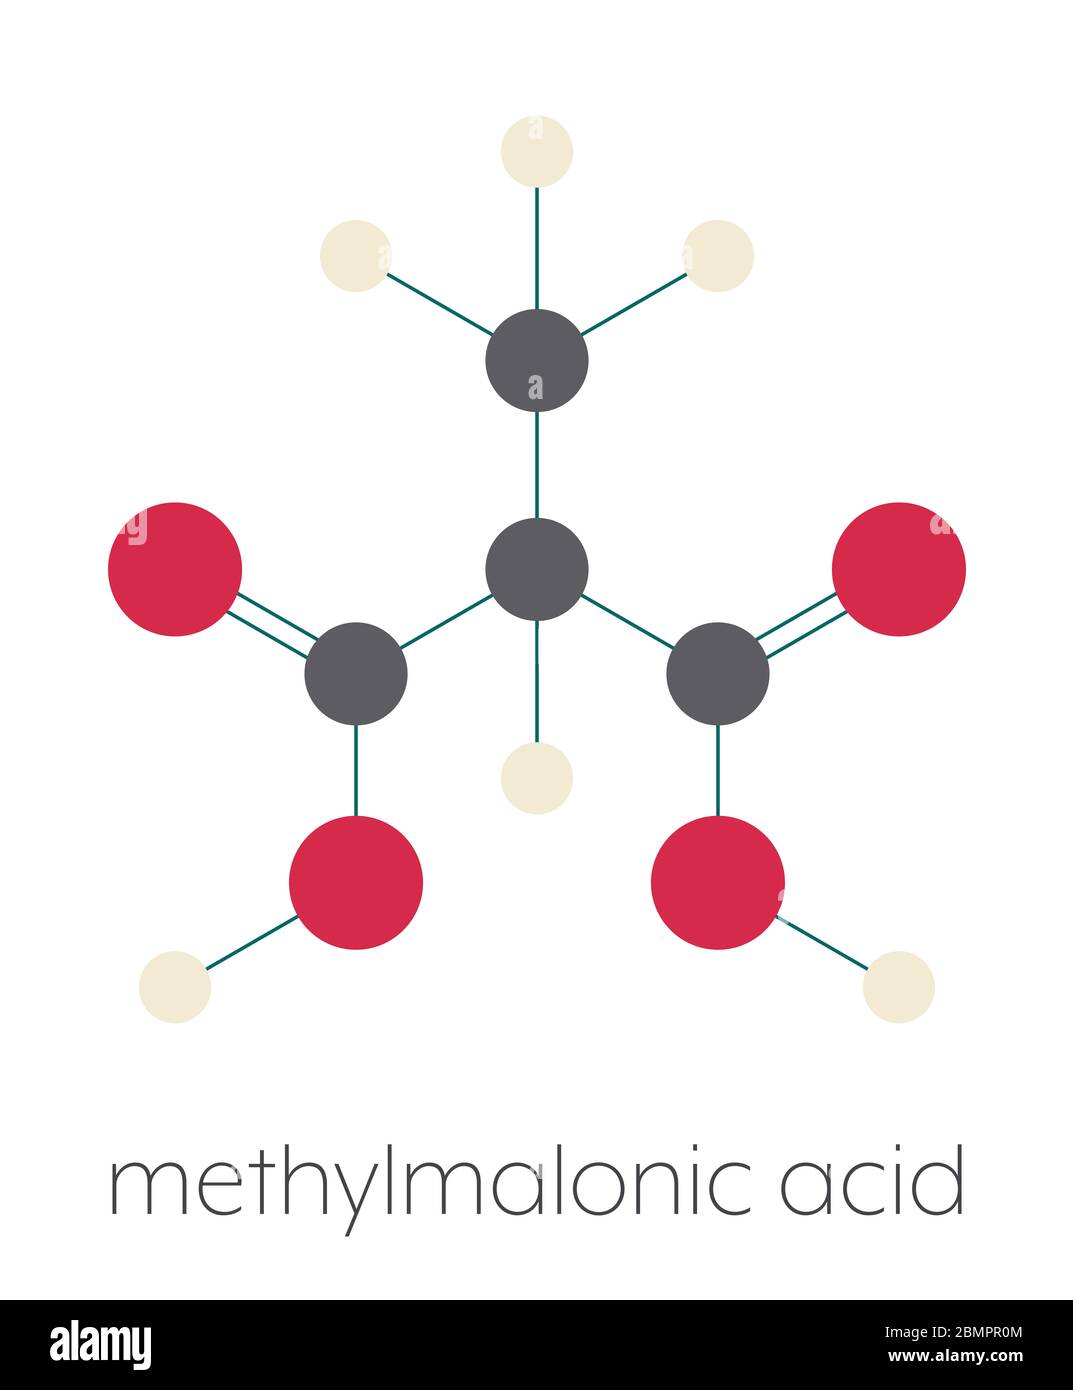 Methylmalonic acid molecule. Increased plasma levels may indicate vitamin B12 deficiency. Stylized skeletal formula (chemical structure): Atoms are shown as color-coded circles: hydrogen (beige), carbon (grey), oxygen (red). Stock Photo